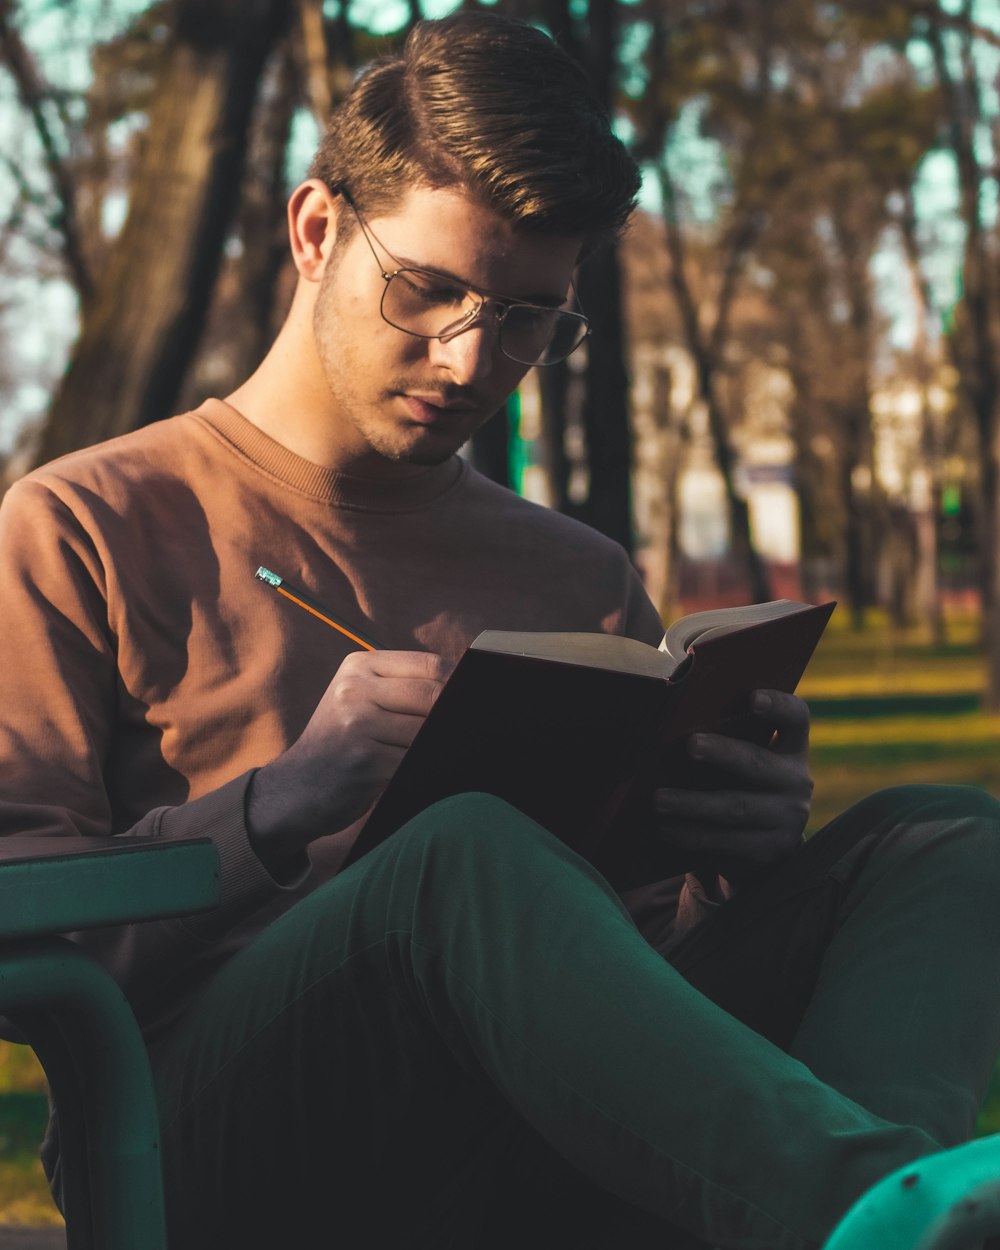 man in brown long sleeve shirt sitting on green plastic chair reading book